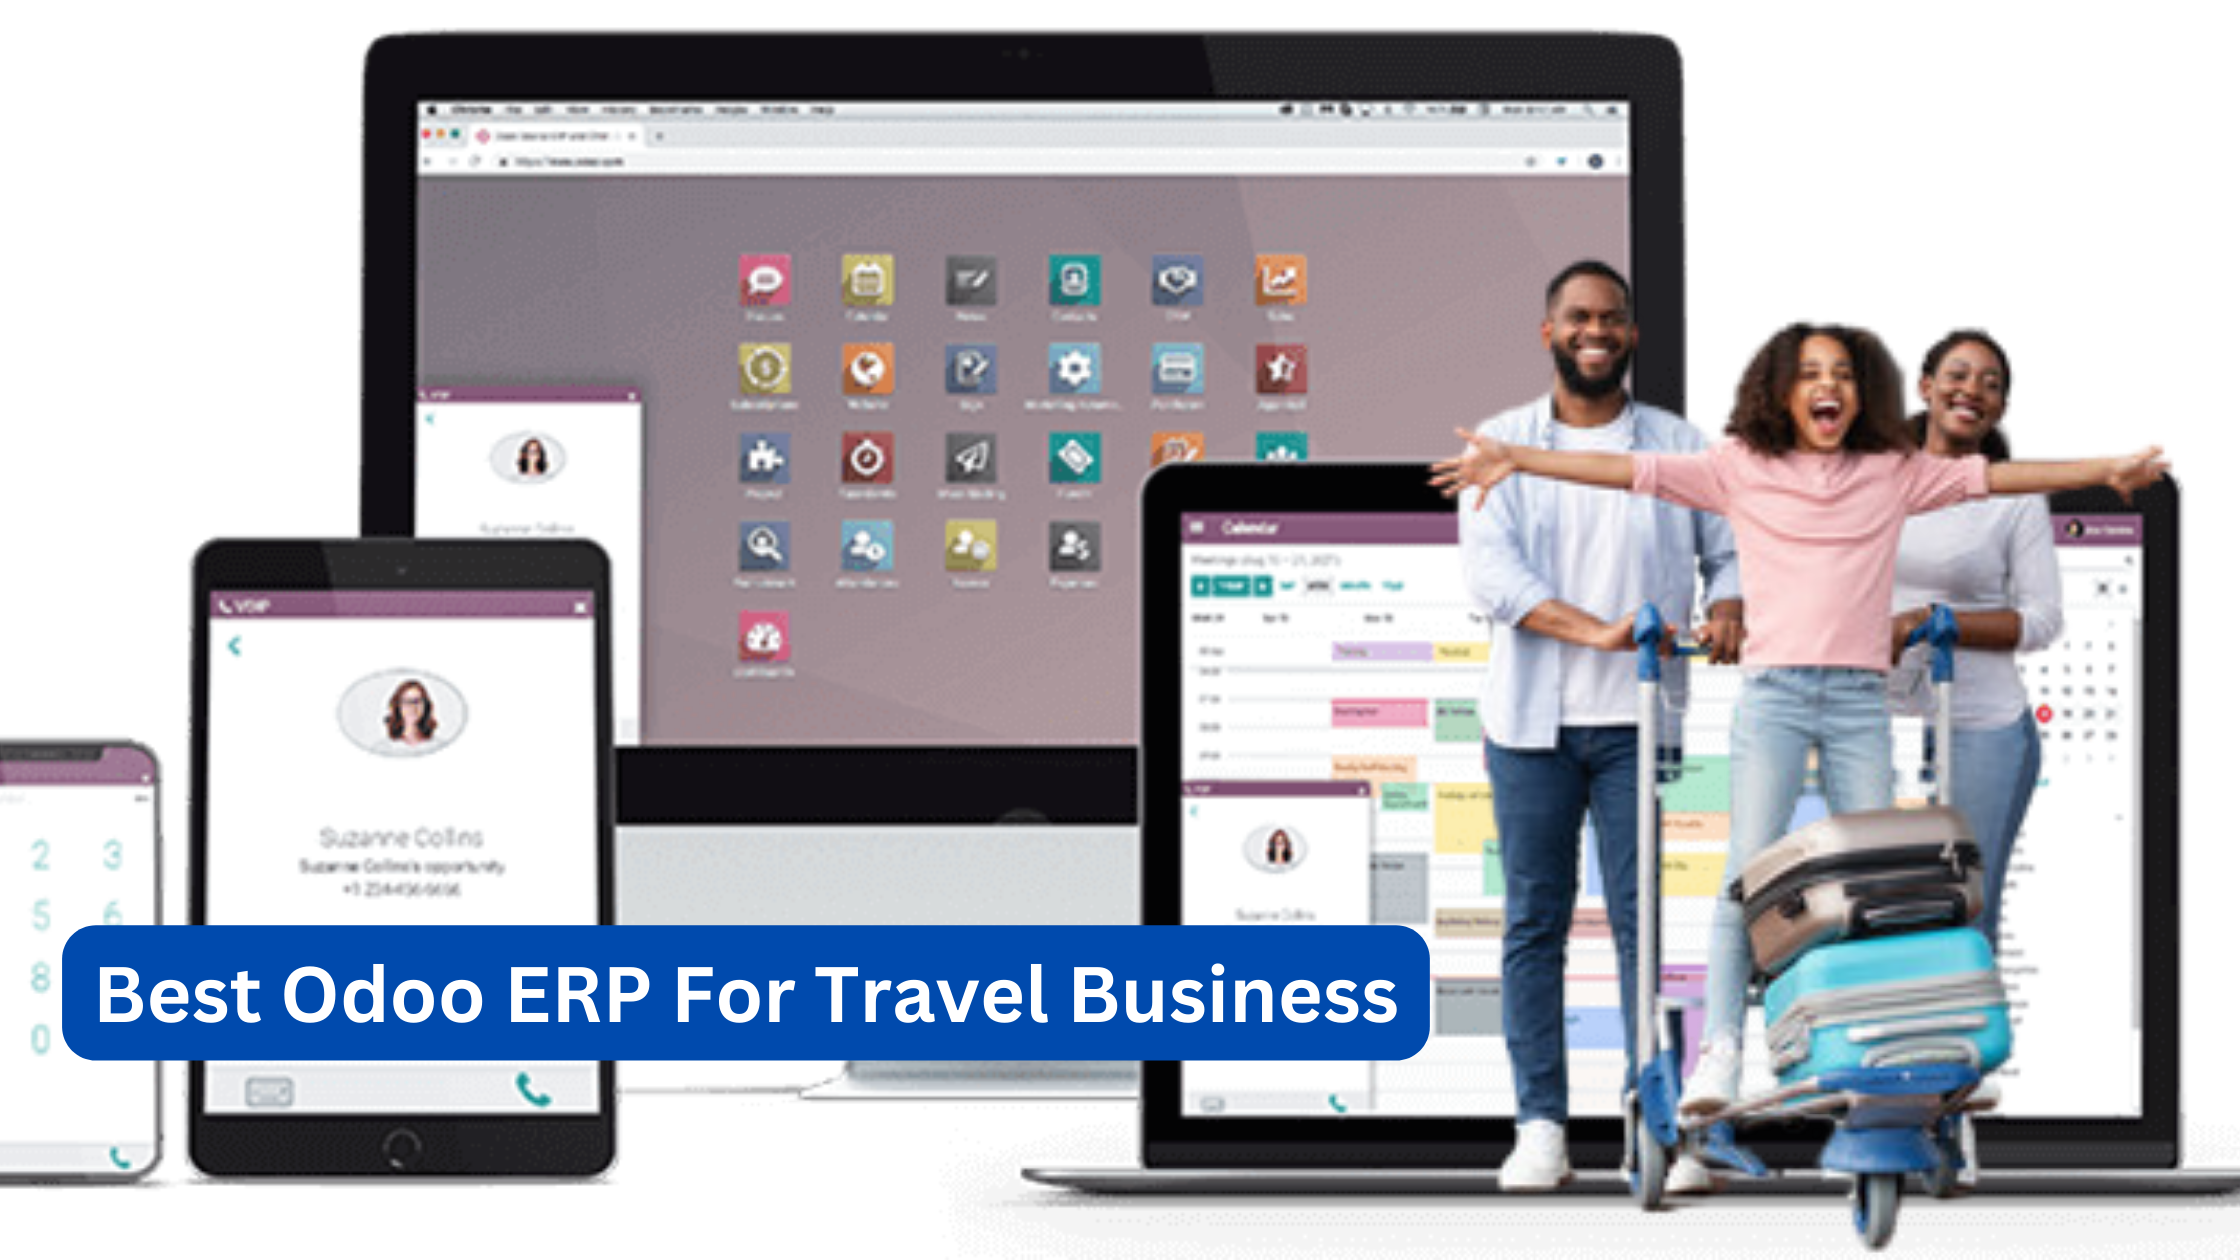 Best Odoo ERP For Travel Business